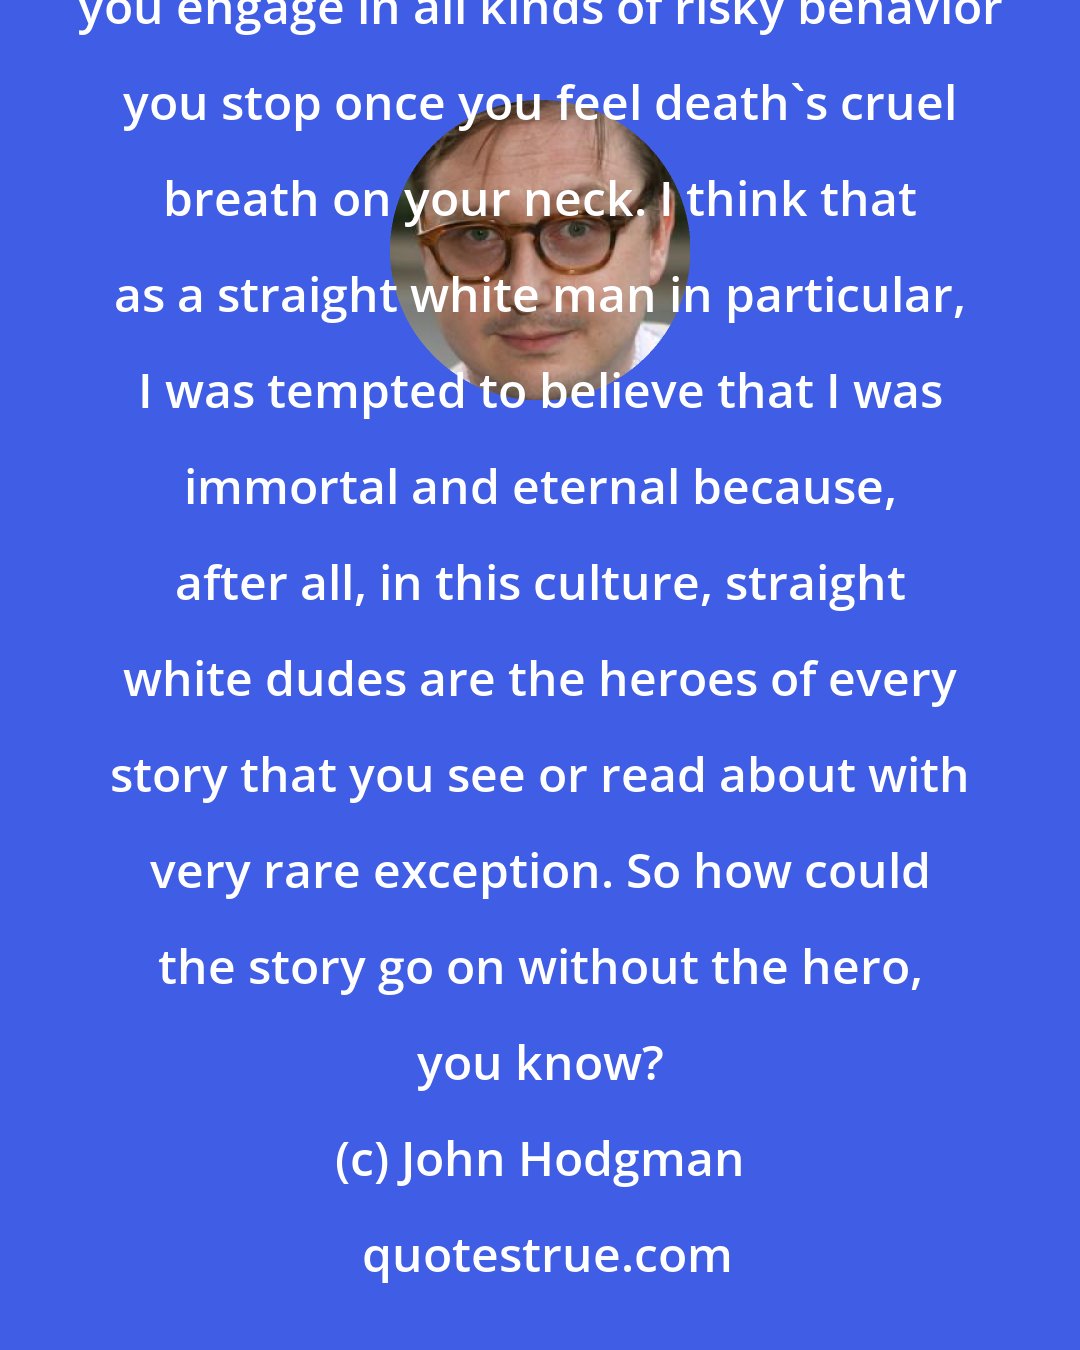 John Hodgman: When you're a young person, you are biologically driven to believe you are immortal, and that's why you engage in all kinds of risky behavior you stop once you feel death's cruel breath on your neck. I think that as a straight white man in particular, I was tempted to believe that I was immortal and eternal because, after all, in this culture, straight white dudes are the heroes of every story that you see or read about with very rare exception. So how could the story go on without the hero, you know?